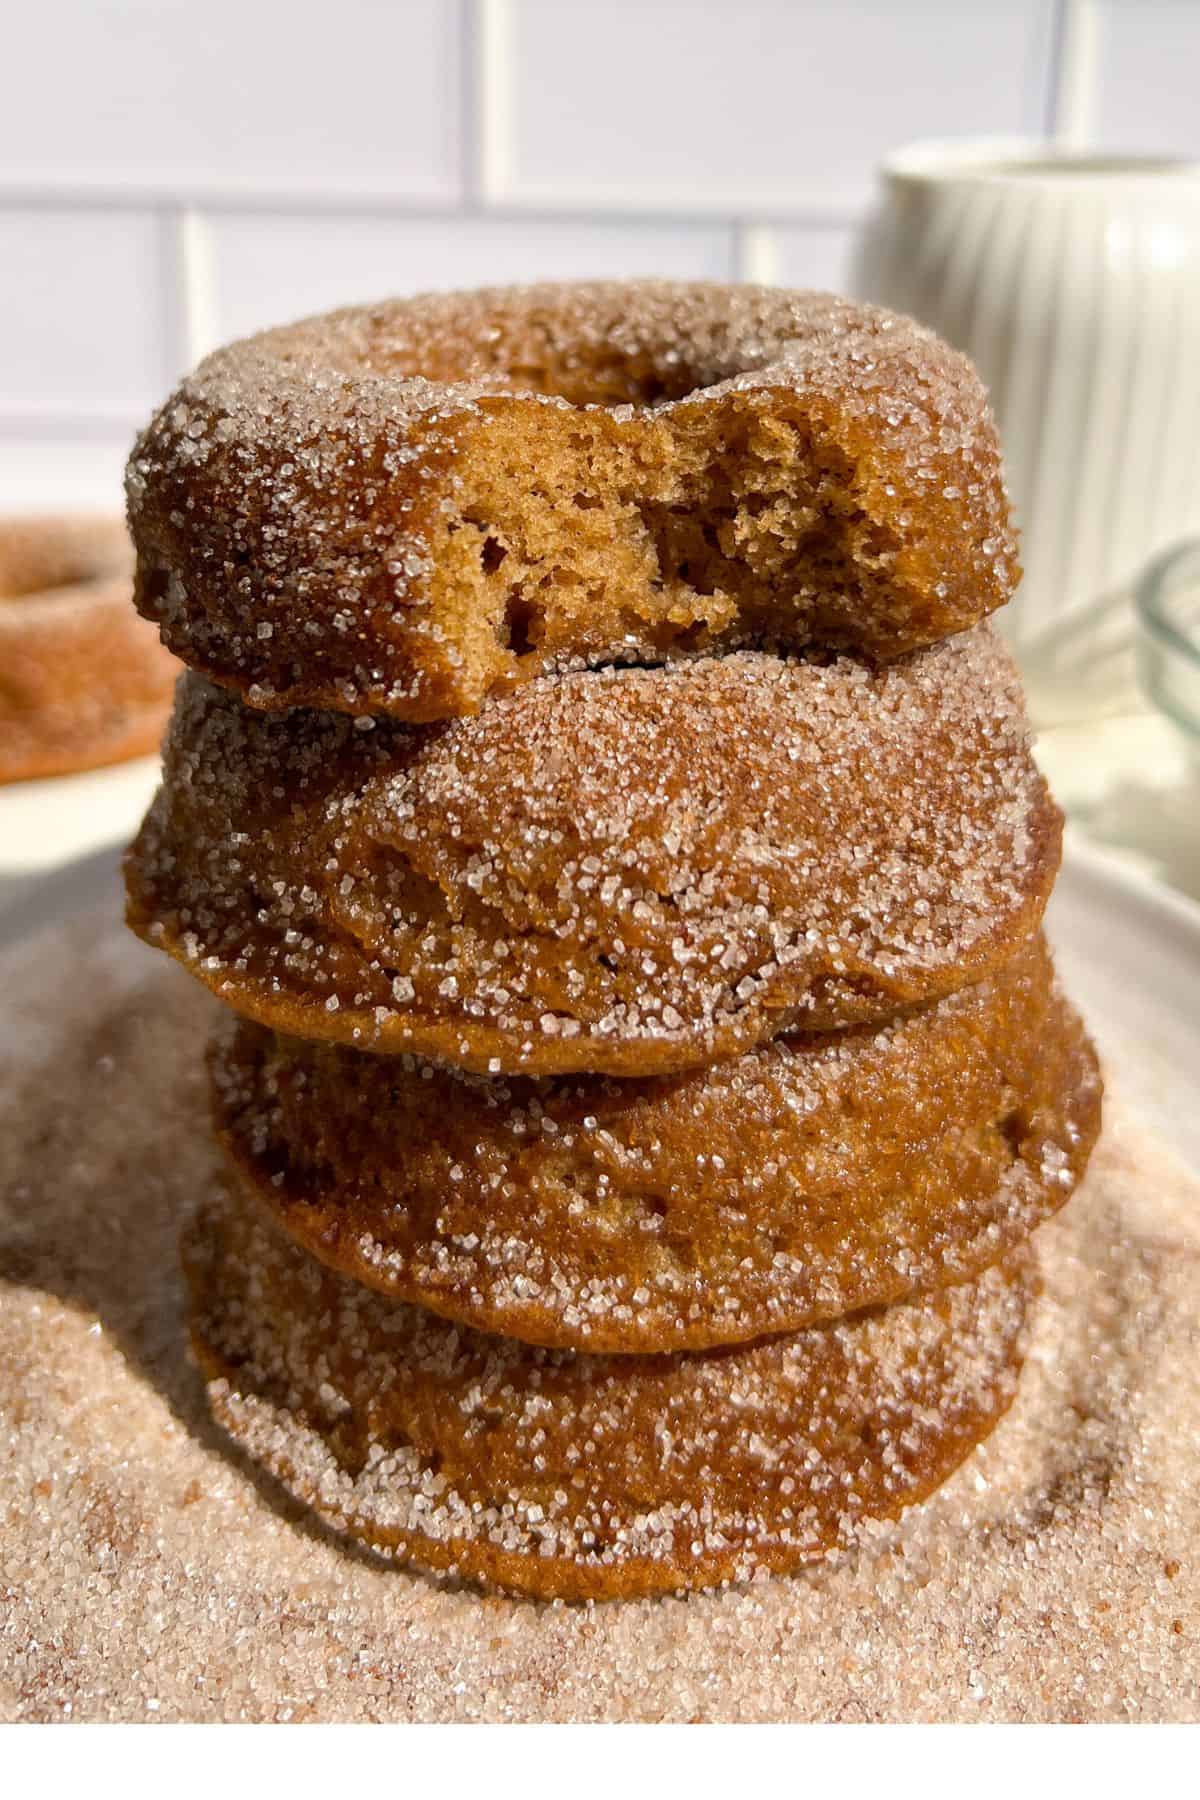 Stack of gluten free apple cider donuts covered in cinnamon sugar.